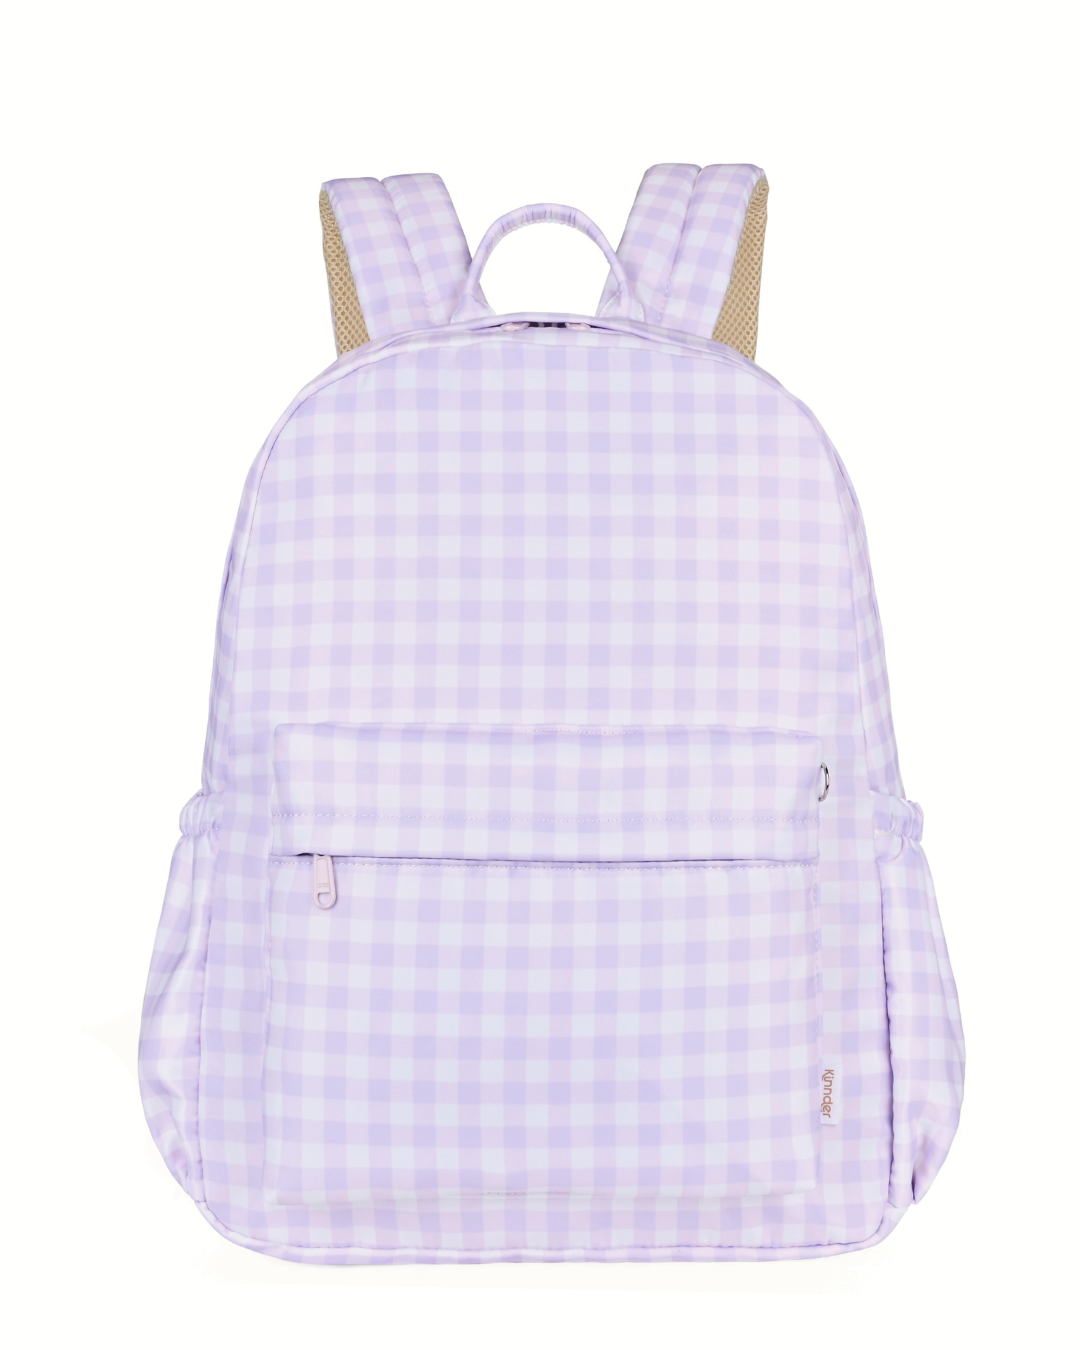 Lilac Gingham Junior Kindy/School Backpack - Extra Deep